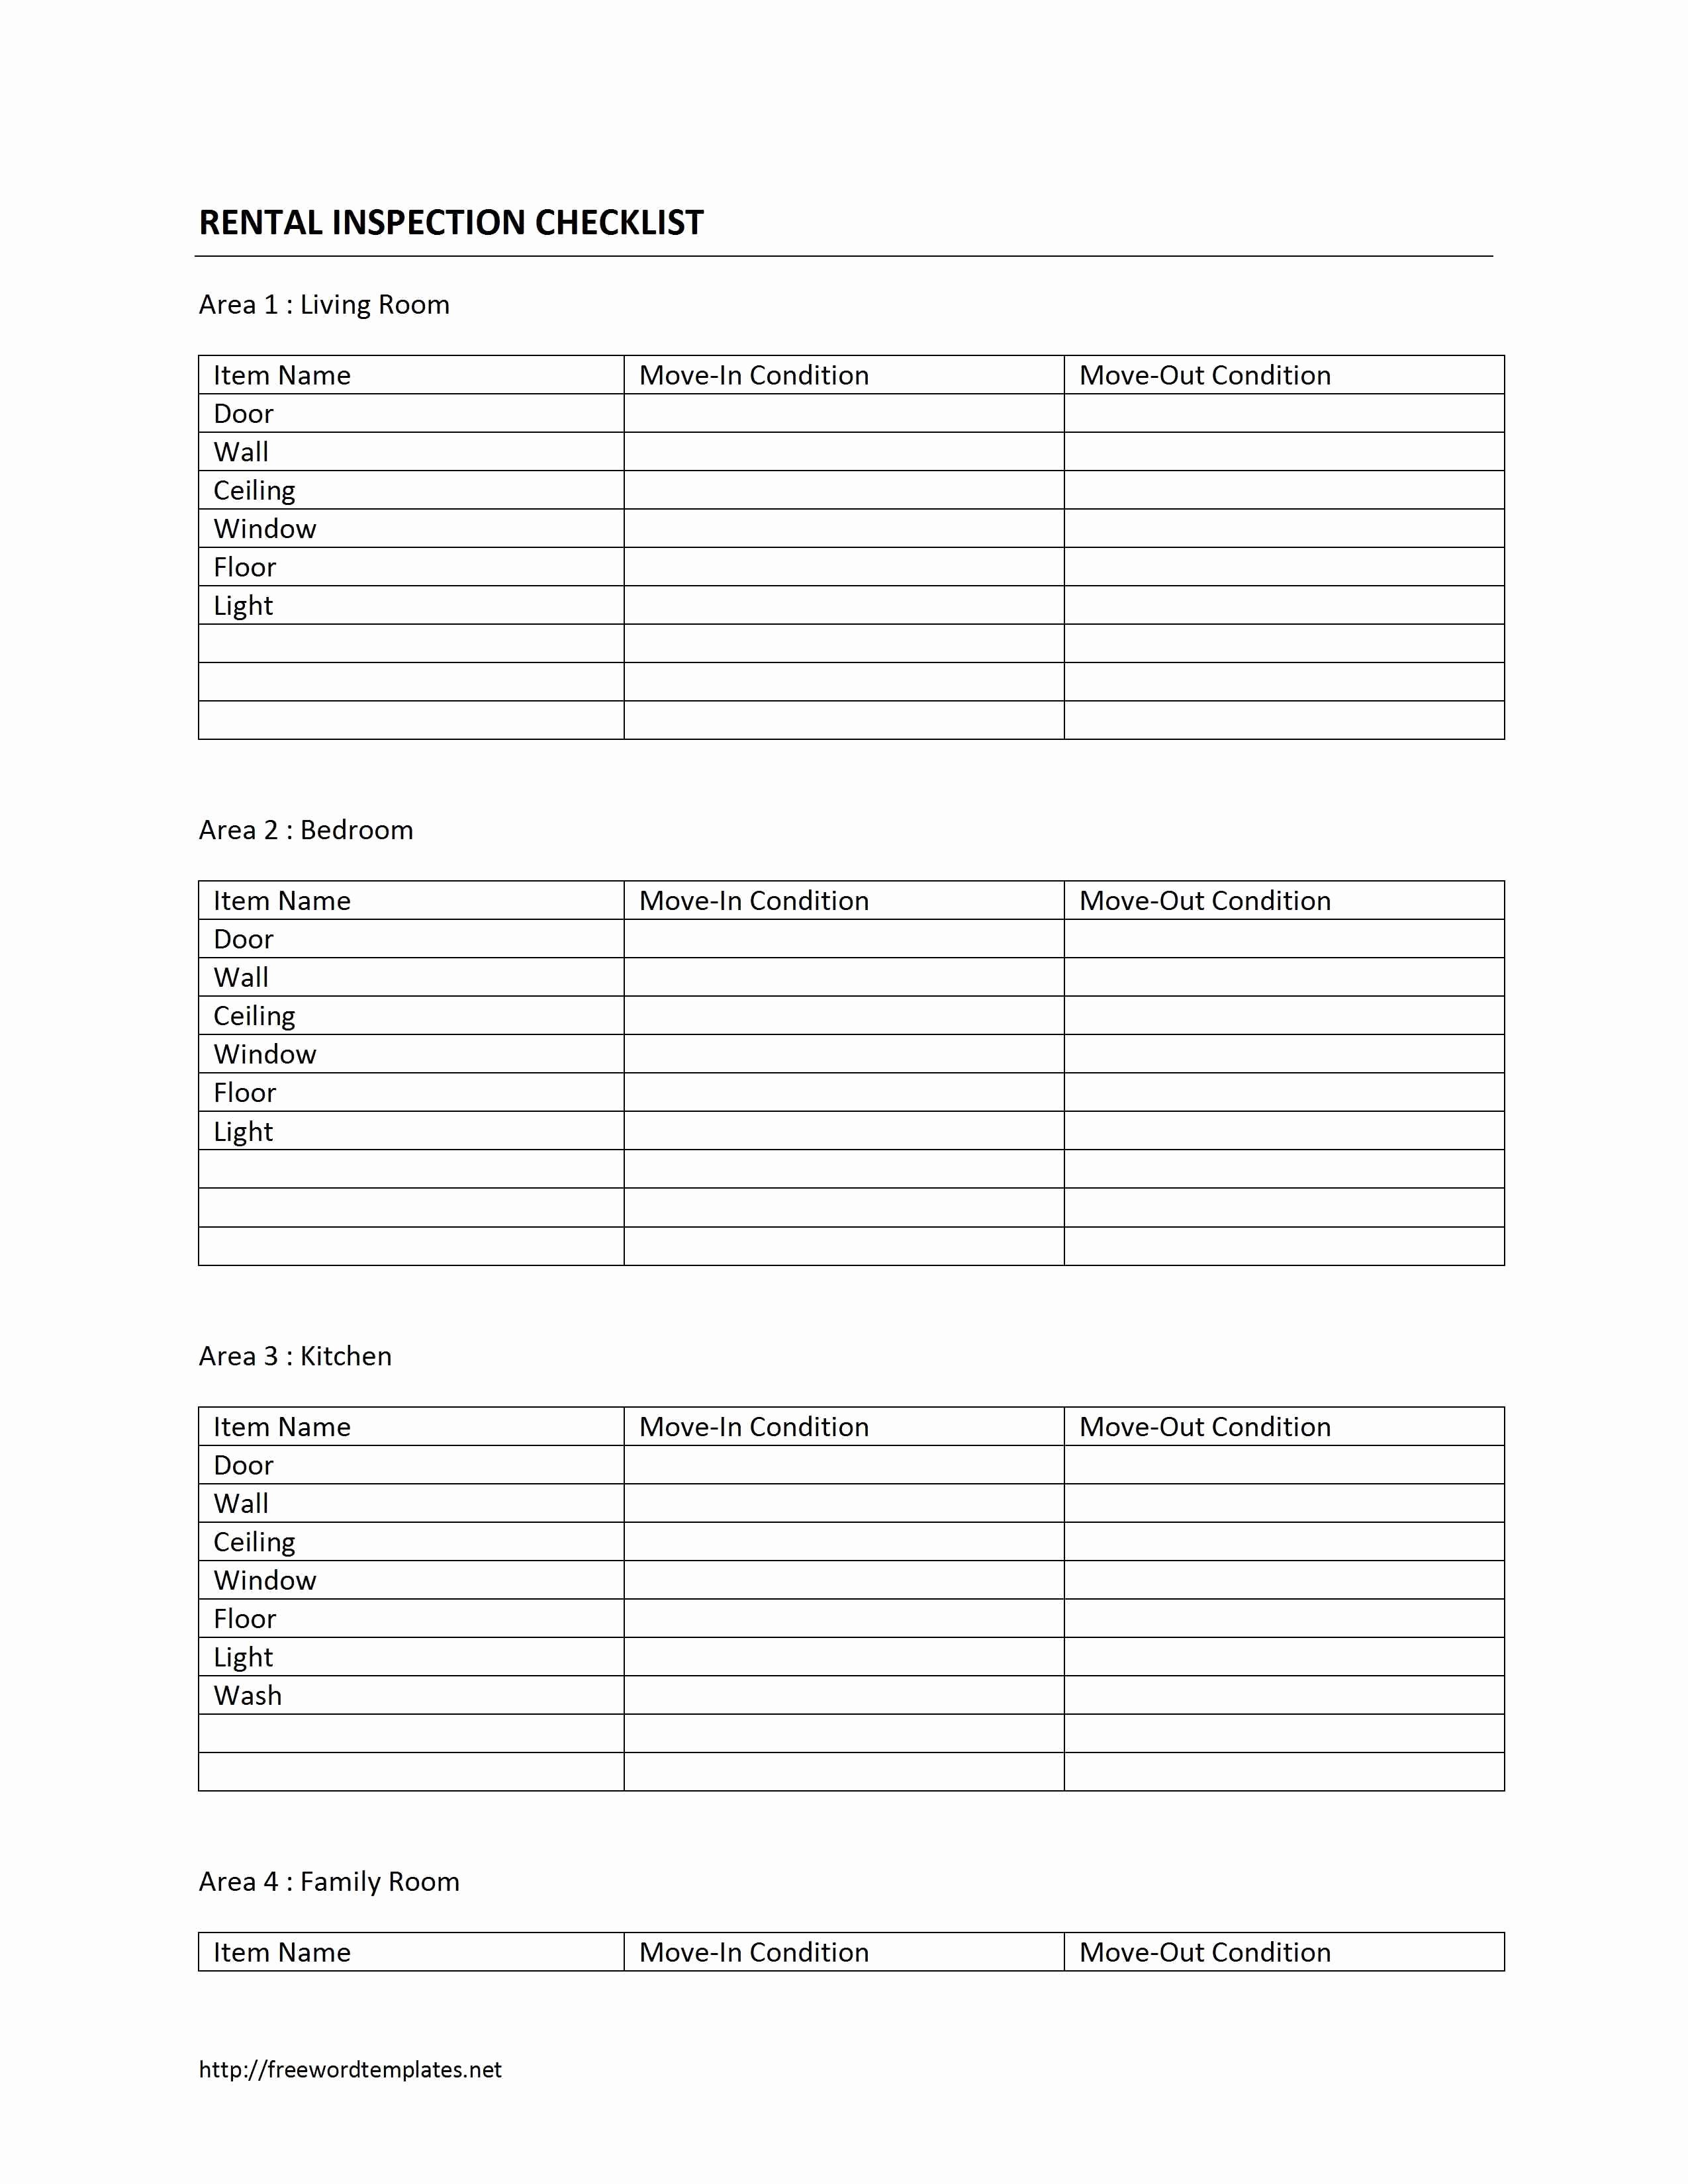 Home Inspection Checklist Template Best Of Home Rental Inspection Checklist Template